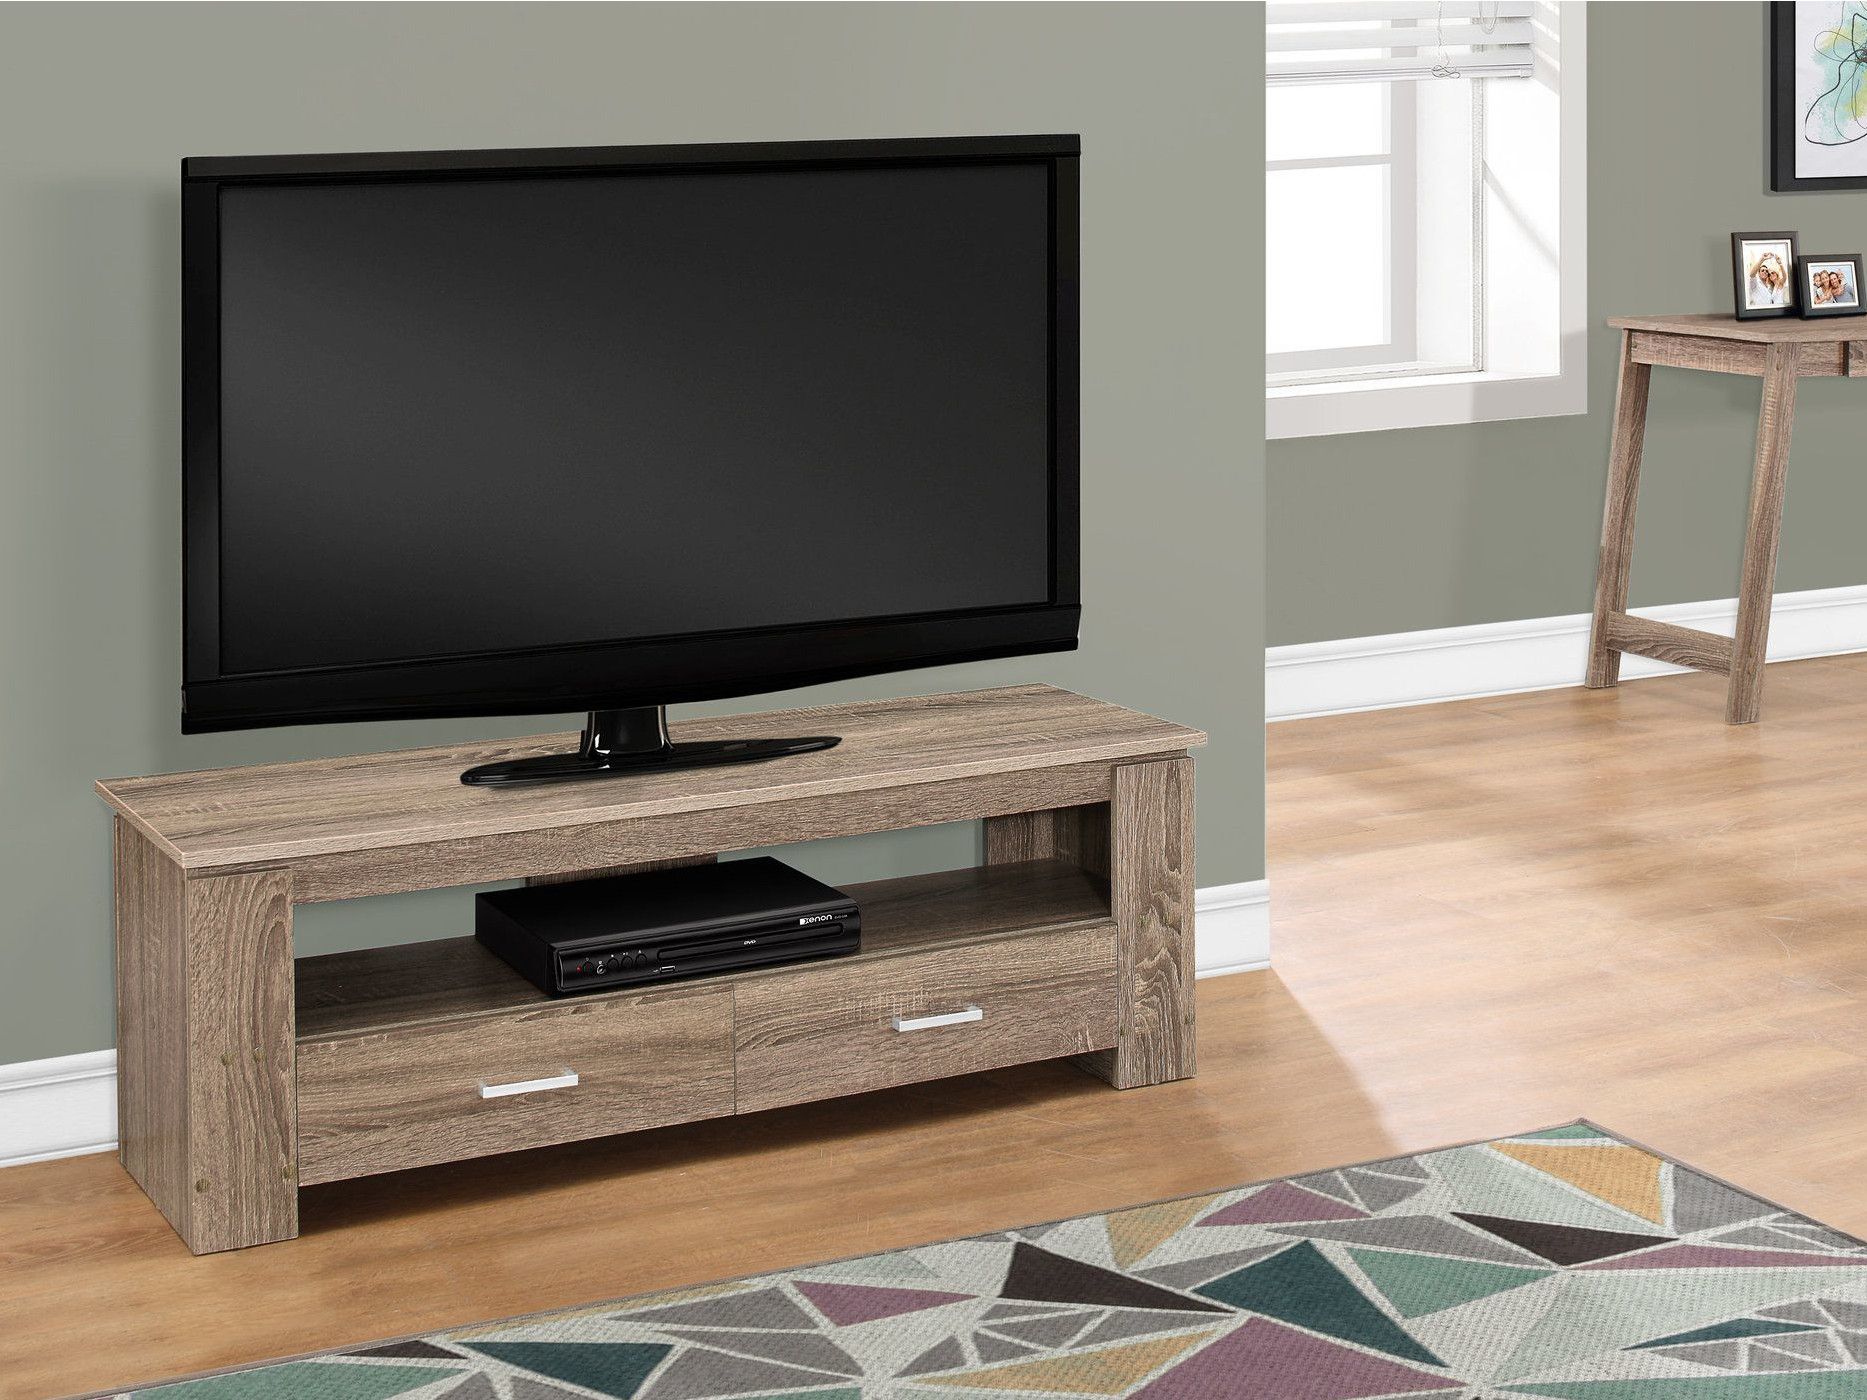 Tv Stand | Nothin' Fancy Furniture Warehouse In Fancy Tv Cabinets (View 3 of 15)